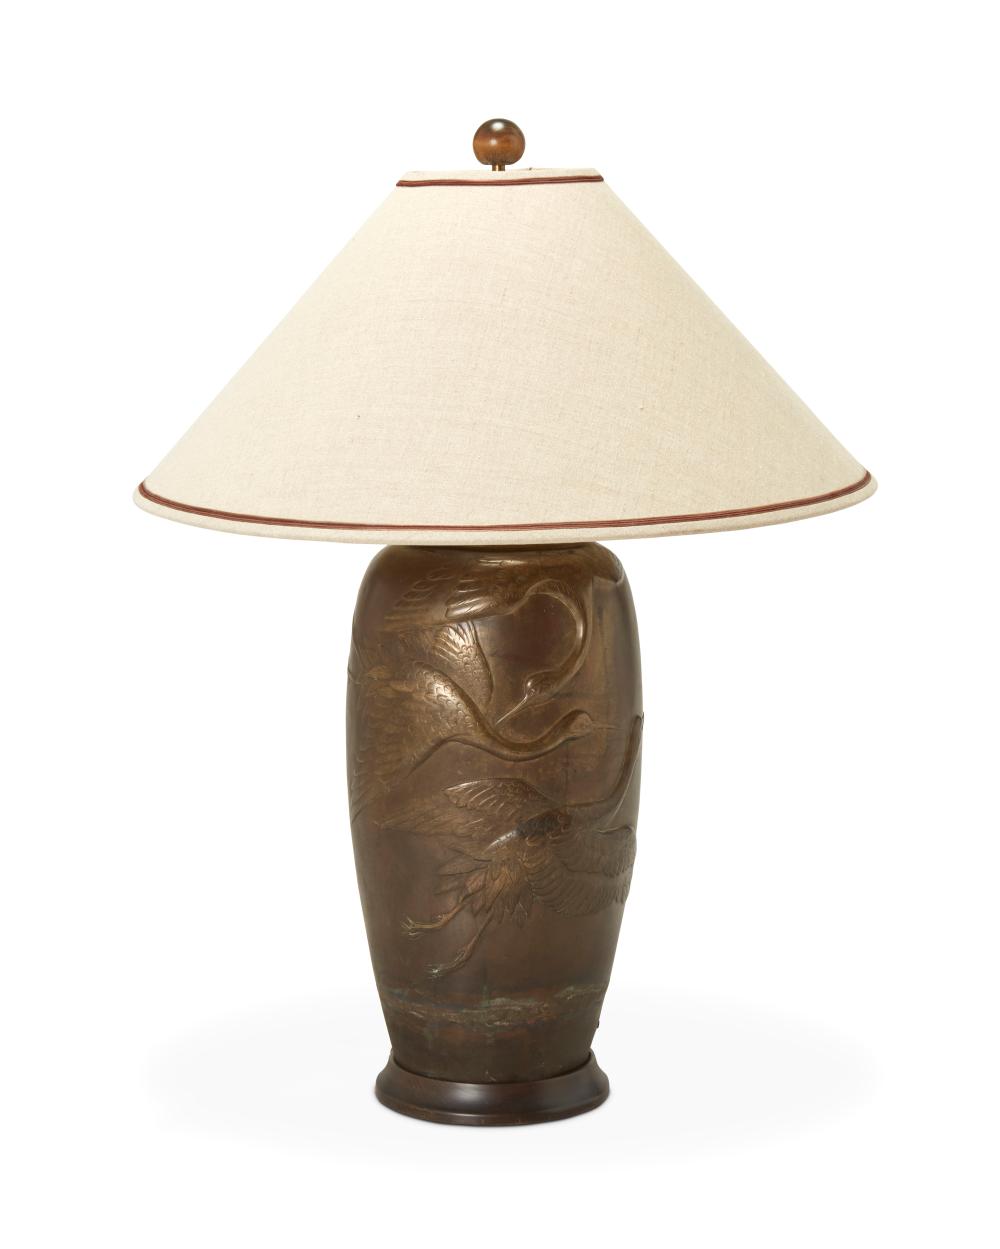 A JAPANESE BRONZE URN TABLE LAMPA 2eef2c